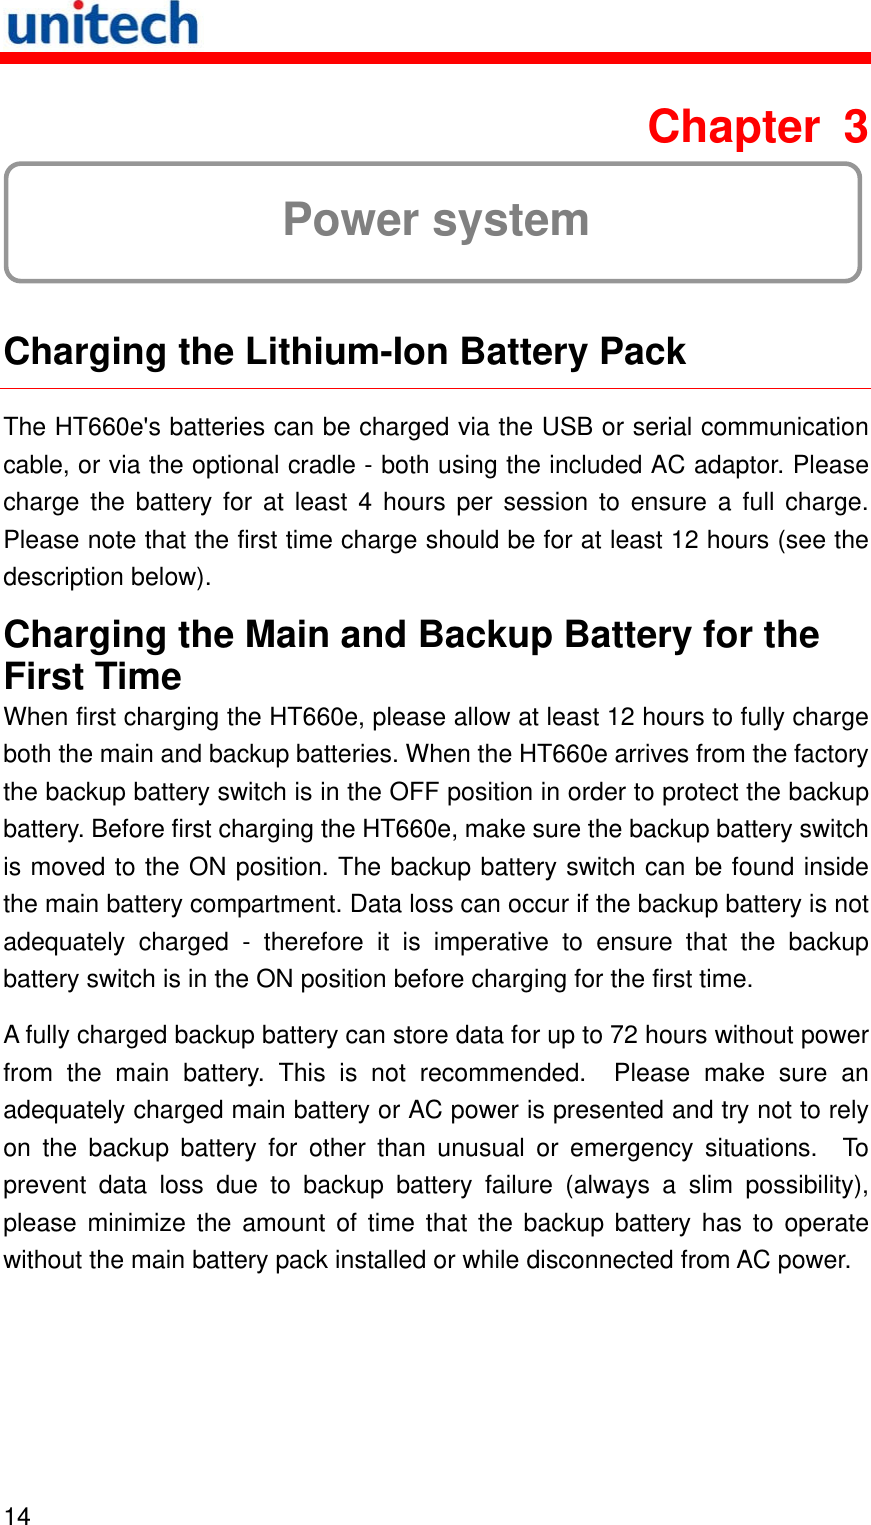   14  Chapter 3  Power system  Charging the Lithium-Ion Battery Pack The HT660e&apos;s batteries can be charged via the USB or serial communication cable, or via the optional cradle - both using the included AC adaptor. Please charge the battery for at least 4 hours per session to ensure a full charge. Please note that the first time charge should be for at least 12 hours (see the description below). Charging the Main and Backup Battery for the First Time When first charging the HT660e, please allow at least 12 hours to fully charge both the main and backup batteries. When the HT660e arrives from the factory the backup battery switch is in the OFF position in order to protect the backup battery. Before first charging the HT660e, make sure the backup battery switch is moved to the ON position. The backup battery switch can be found inside the main battery compartment. Data loss can occur if the backup battery is not adequately charged - therefore it is imperative to ensure that the backup battery switch is in the ON position before charging for the first time. A fully charged backup battery can store data for up to 72 hours without power from the main battery. This is not recommended.  Please make sure an adequately charged main battery or AC power is presented and try not to rely on the backup battery for other than unusual or emergency situations.  To prevent data loss due to backup battery failure (always a slim possibility), please minimize the amount of time that the backup battery has to operate without the main battery pack installed or while disconnected from AC power. 